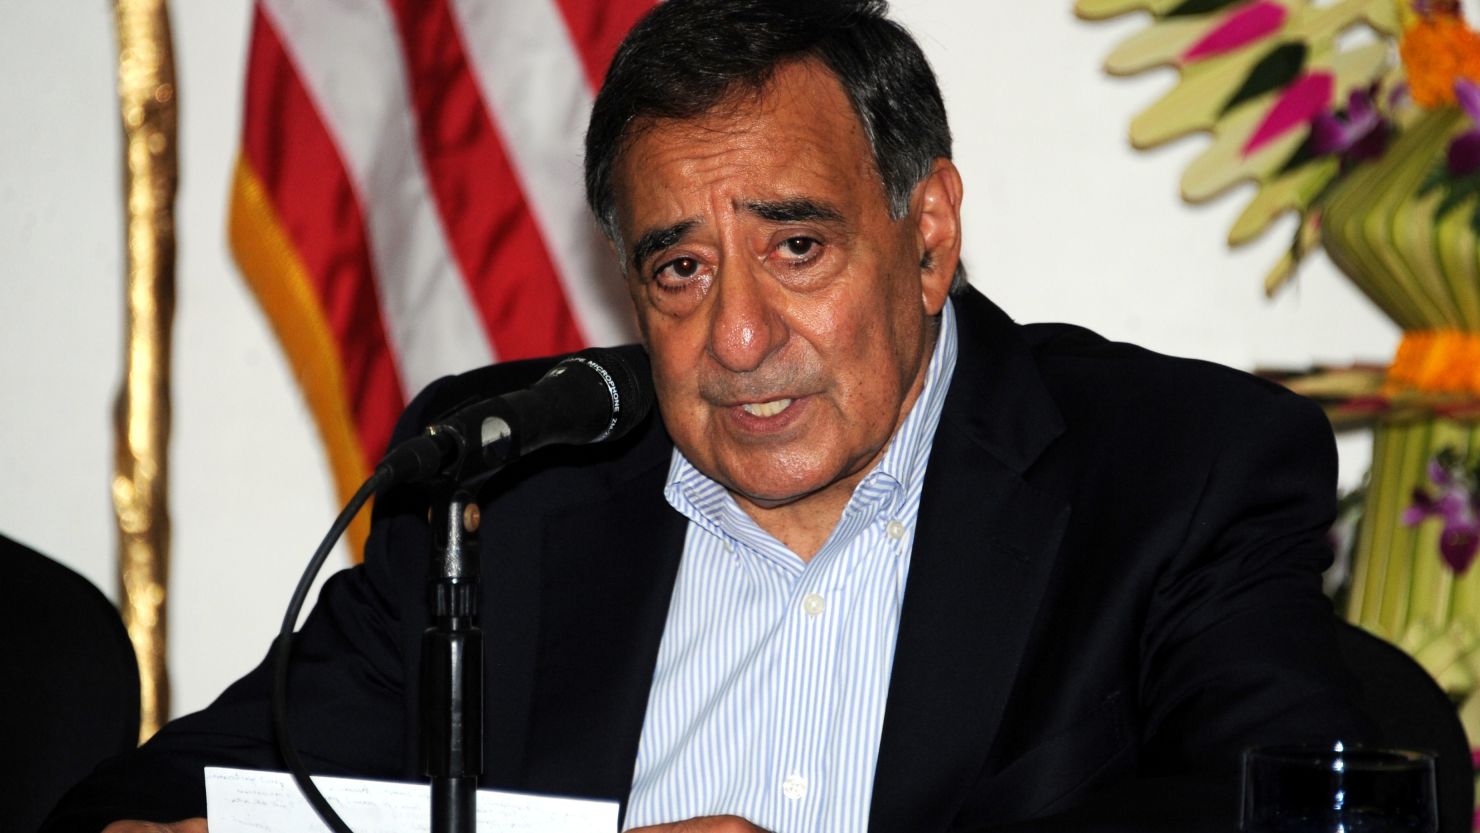 U.S. Defence Secretary Leon Panetta praised China during the ASEAN Defence Ministers' meeting on Sunday.